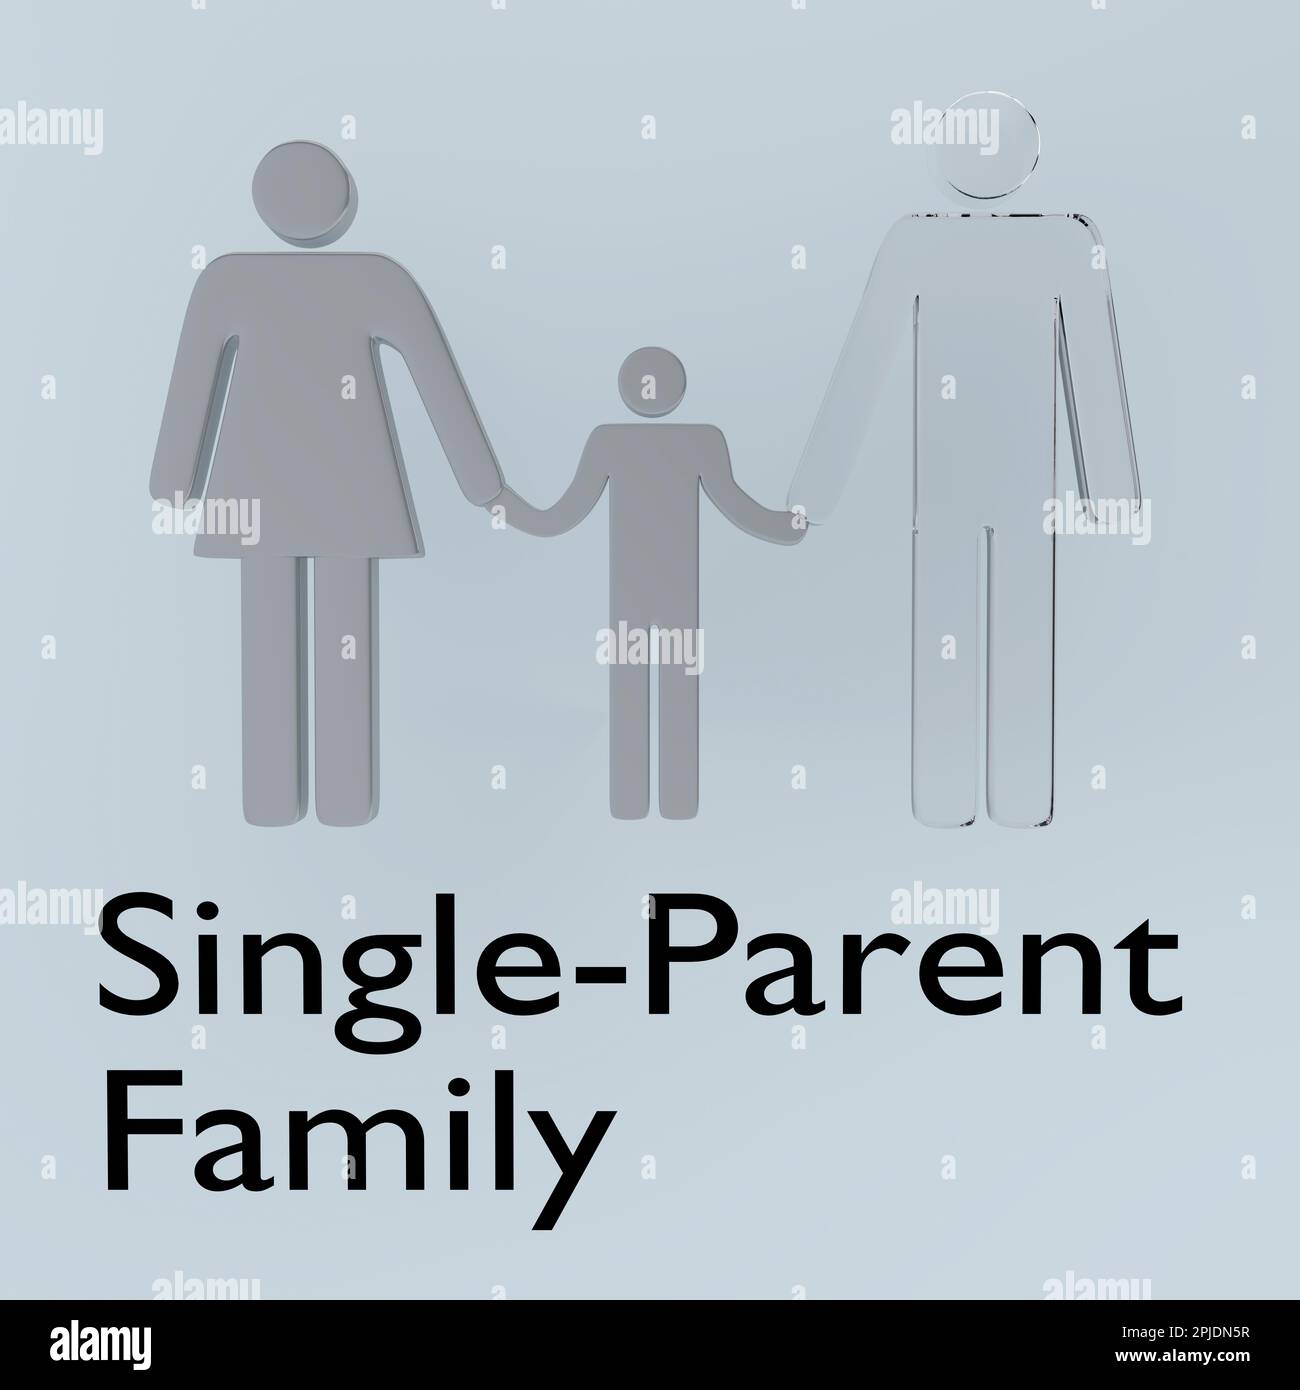 3D illustration of a child holding hands with his mother and a transparent image of a man resembling the missing father, titled as Single-Parent Famil Stock Photo